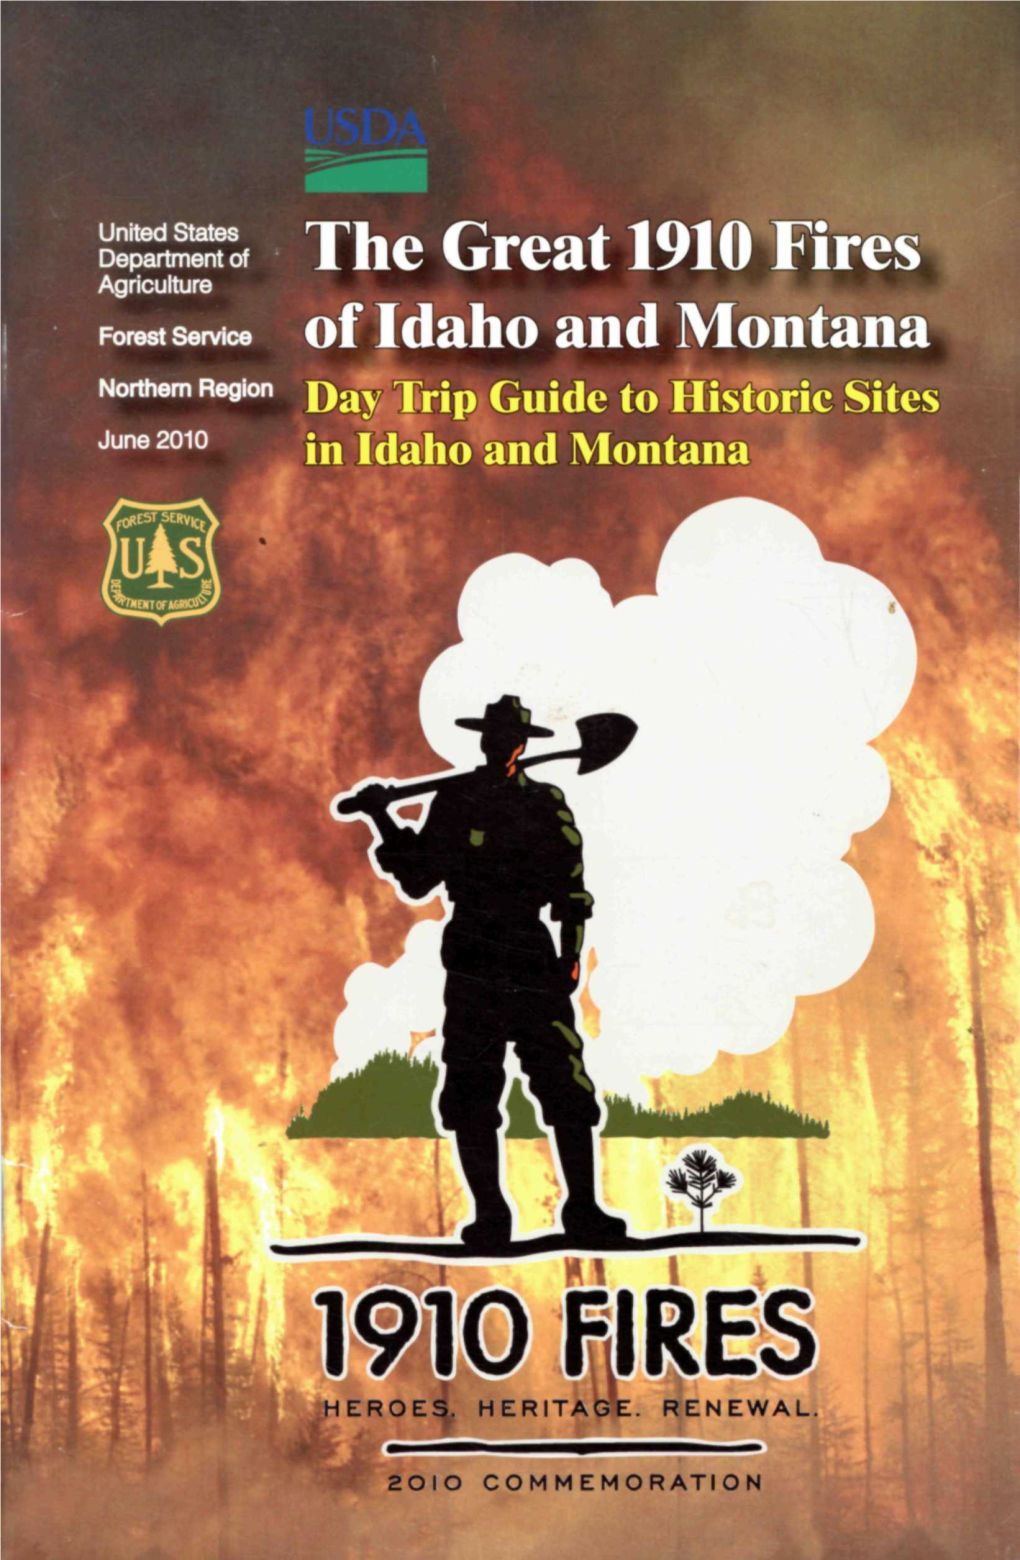 1910 Fires Agriculture Forest Service of Idaho and Montana Northern Region Day Trip Guide to Historic Sites June 2010 in Idaho and Montana